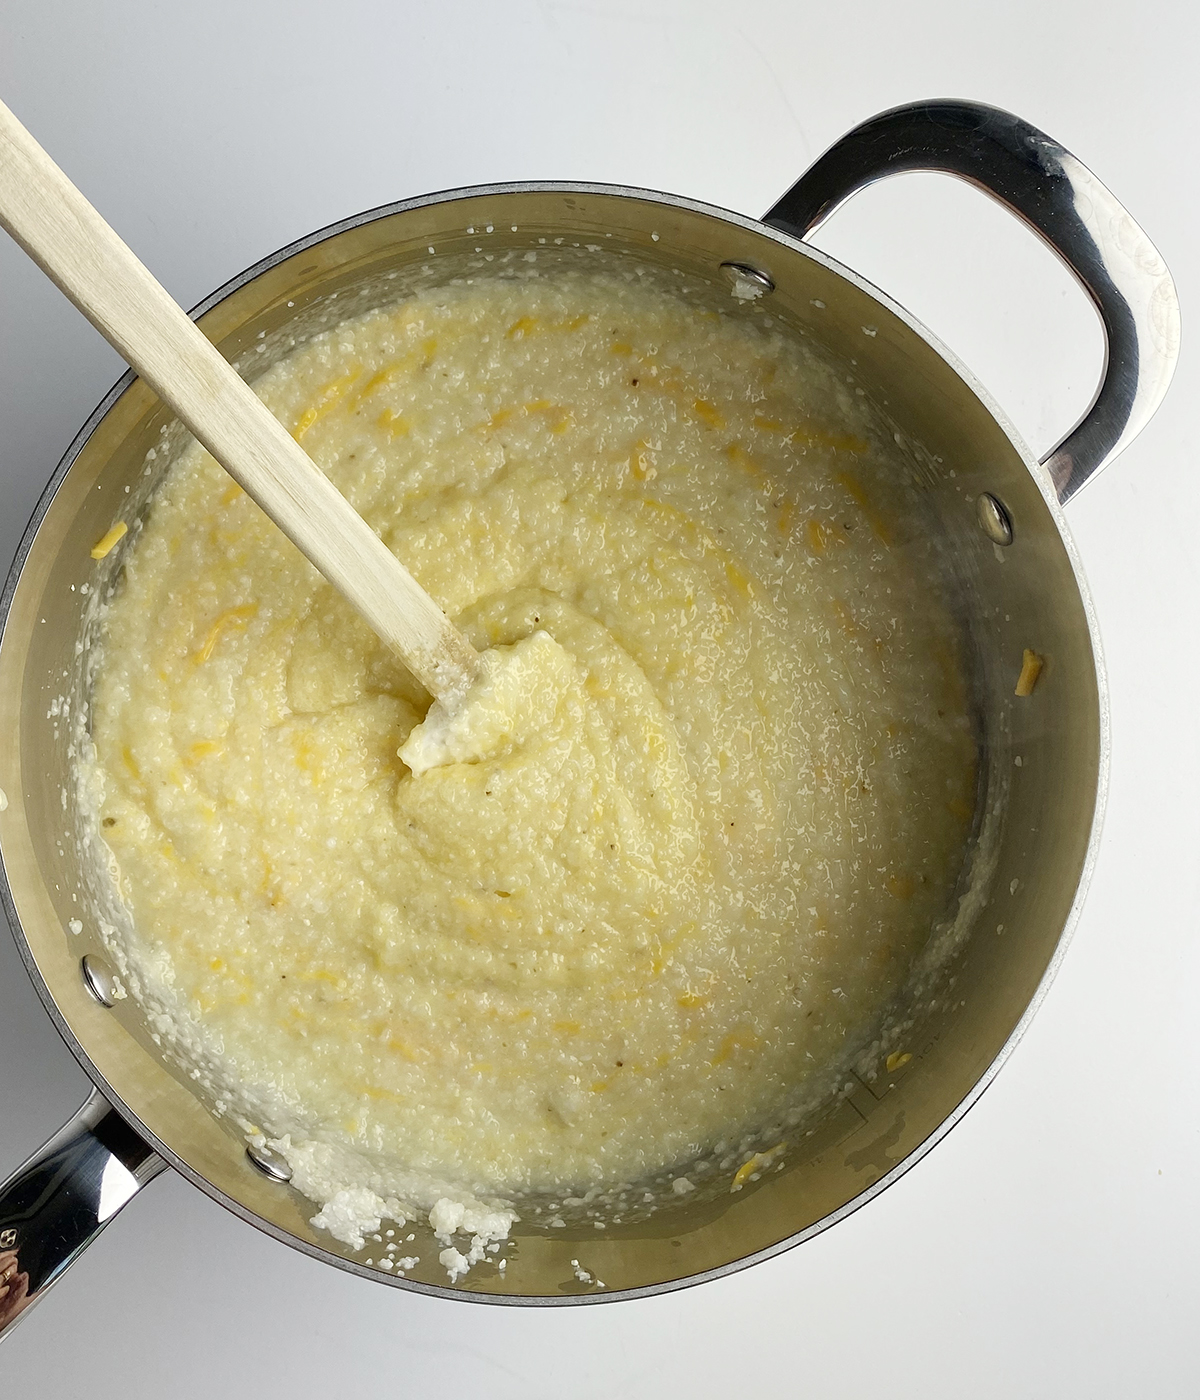 Cheese being stirred into a pot of grits.